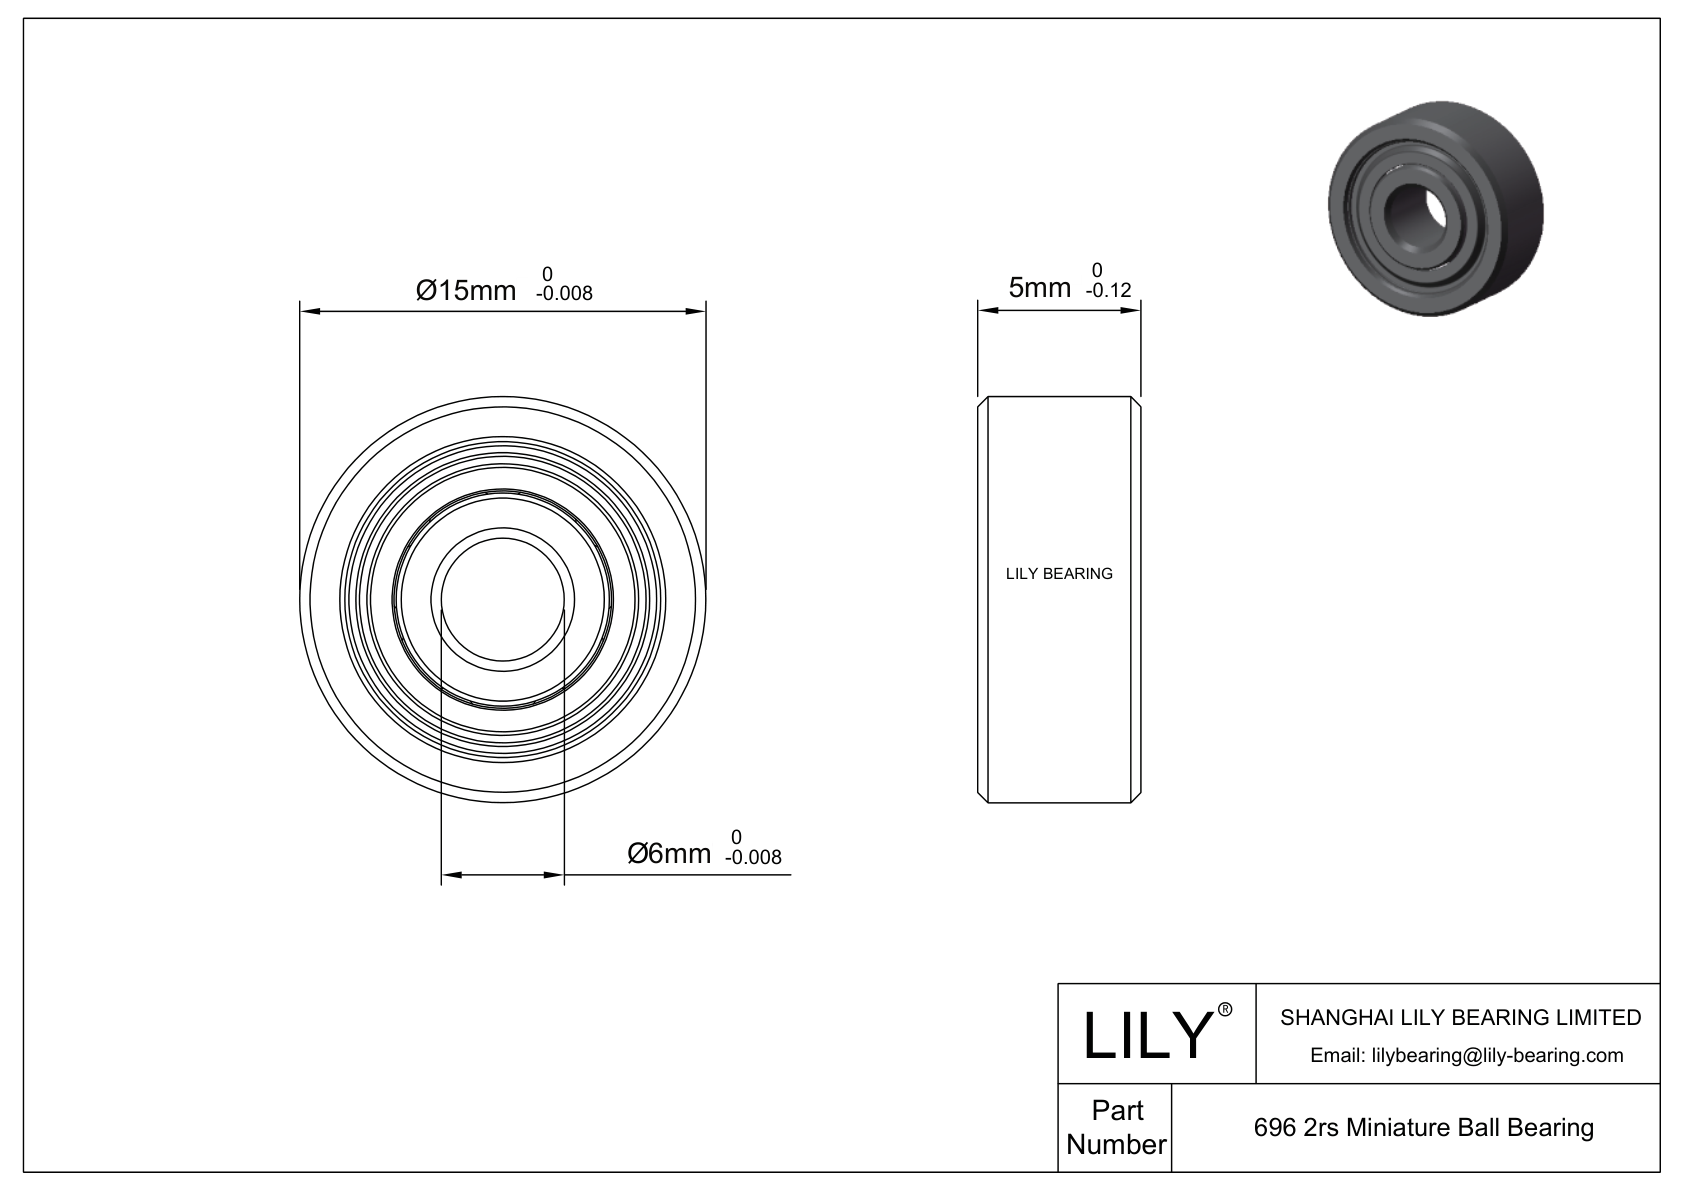 LILY-BS69622-7 POM Coated Bearing cad drawing